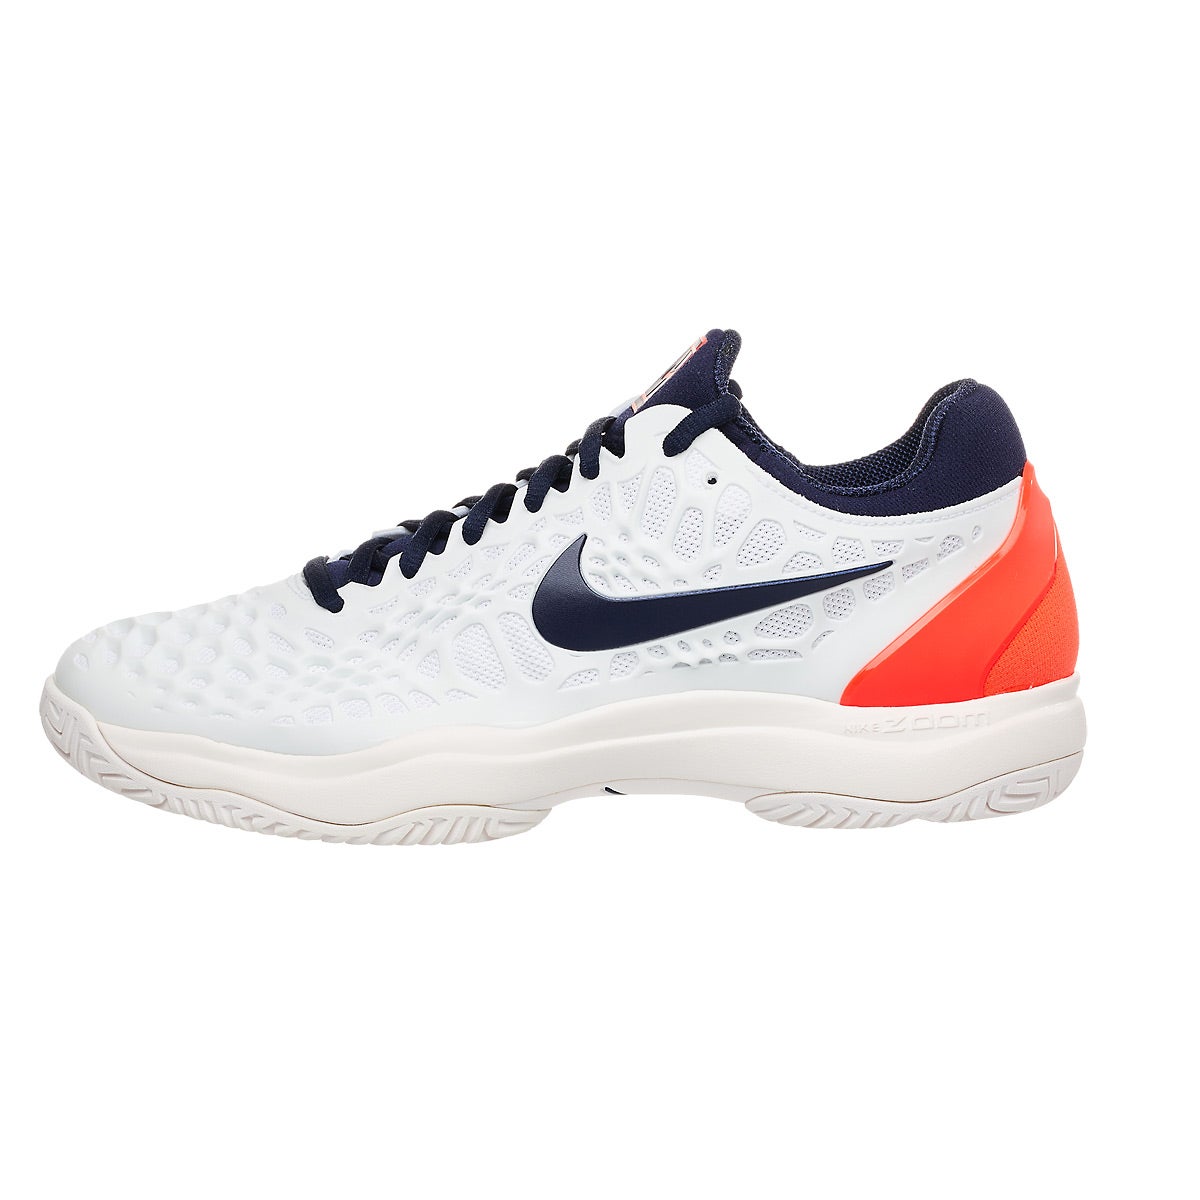 Nike Zoom Cage 3 White/Blue Men's Shoe 360° View